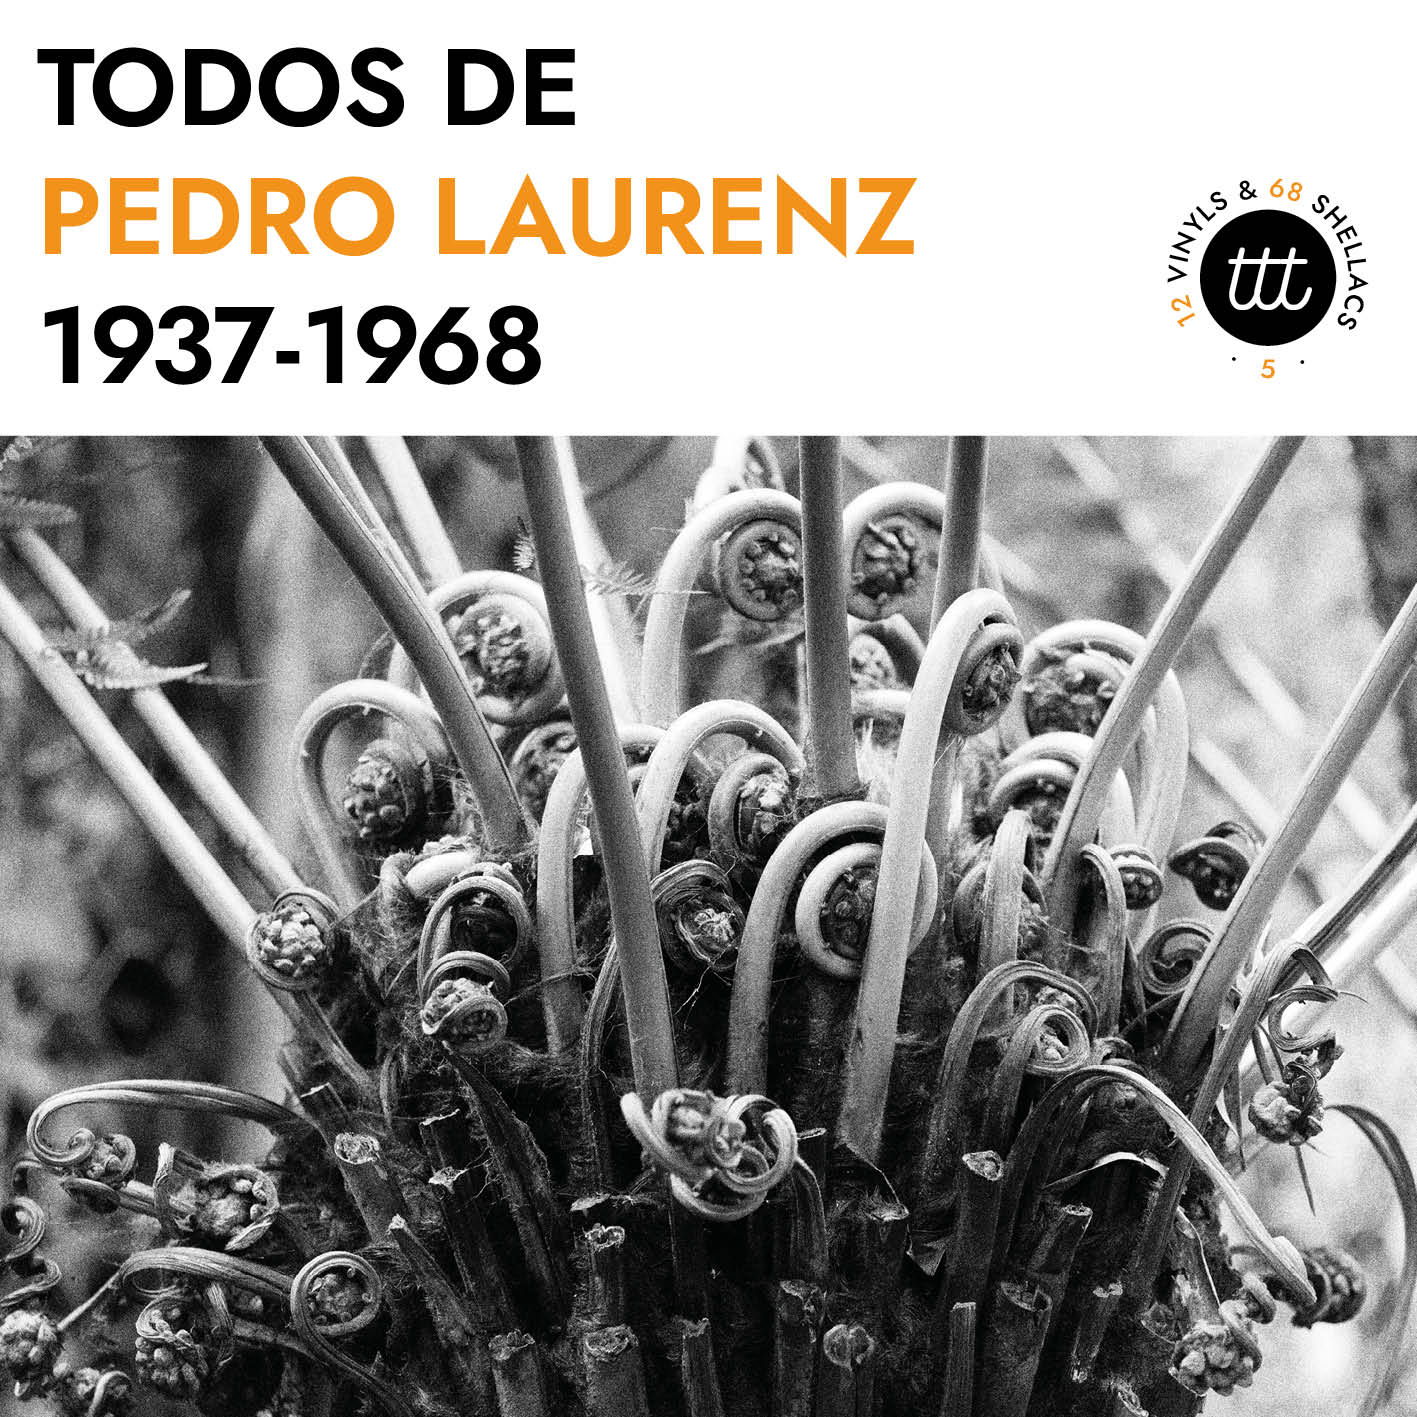 Pedro Laurenz all recordings from the years 1937-1968